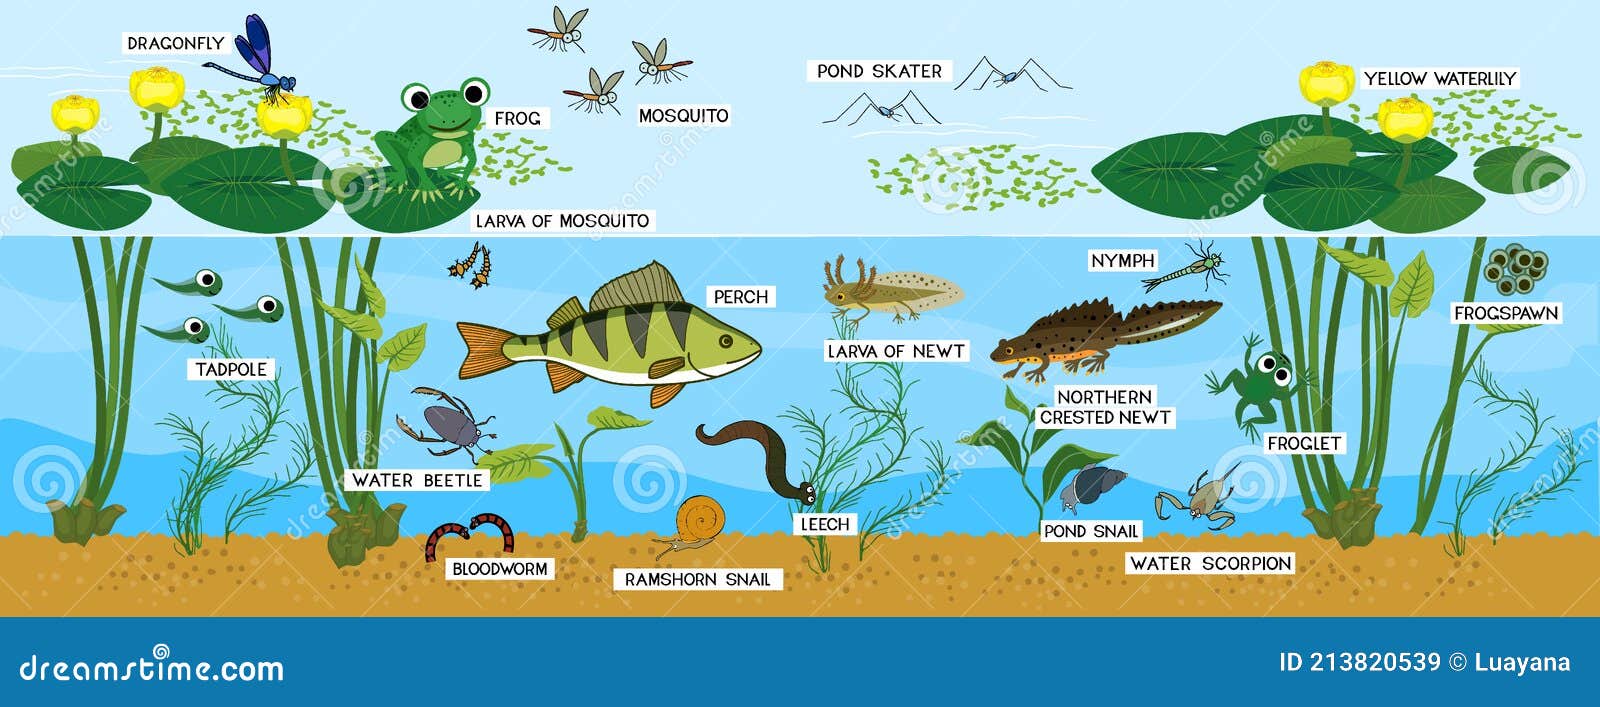 ecosystem of pond. animals living in pond. diverse inhabitants of pond fish, amphibian, leech, insects and bird